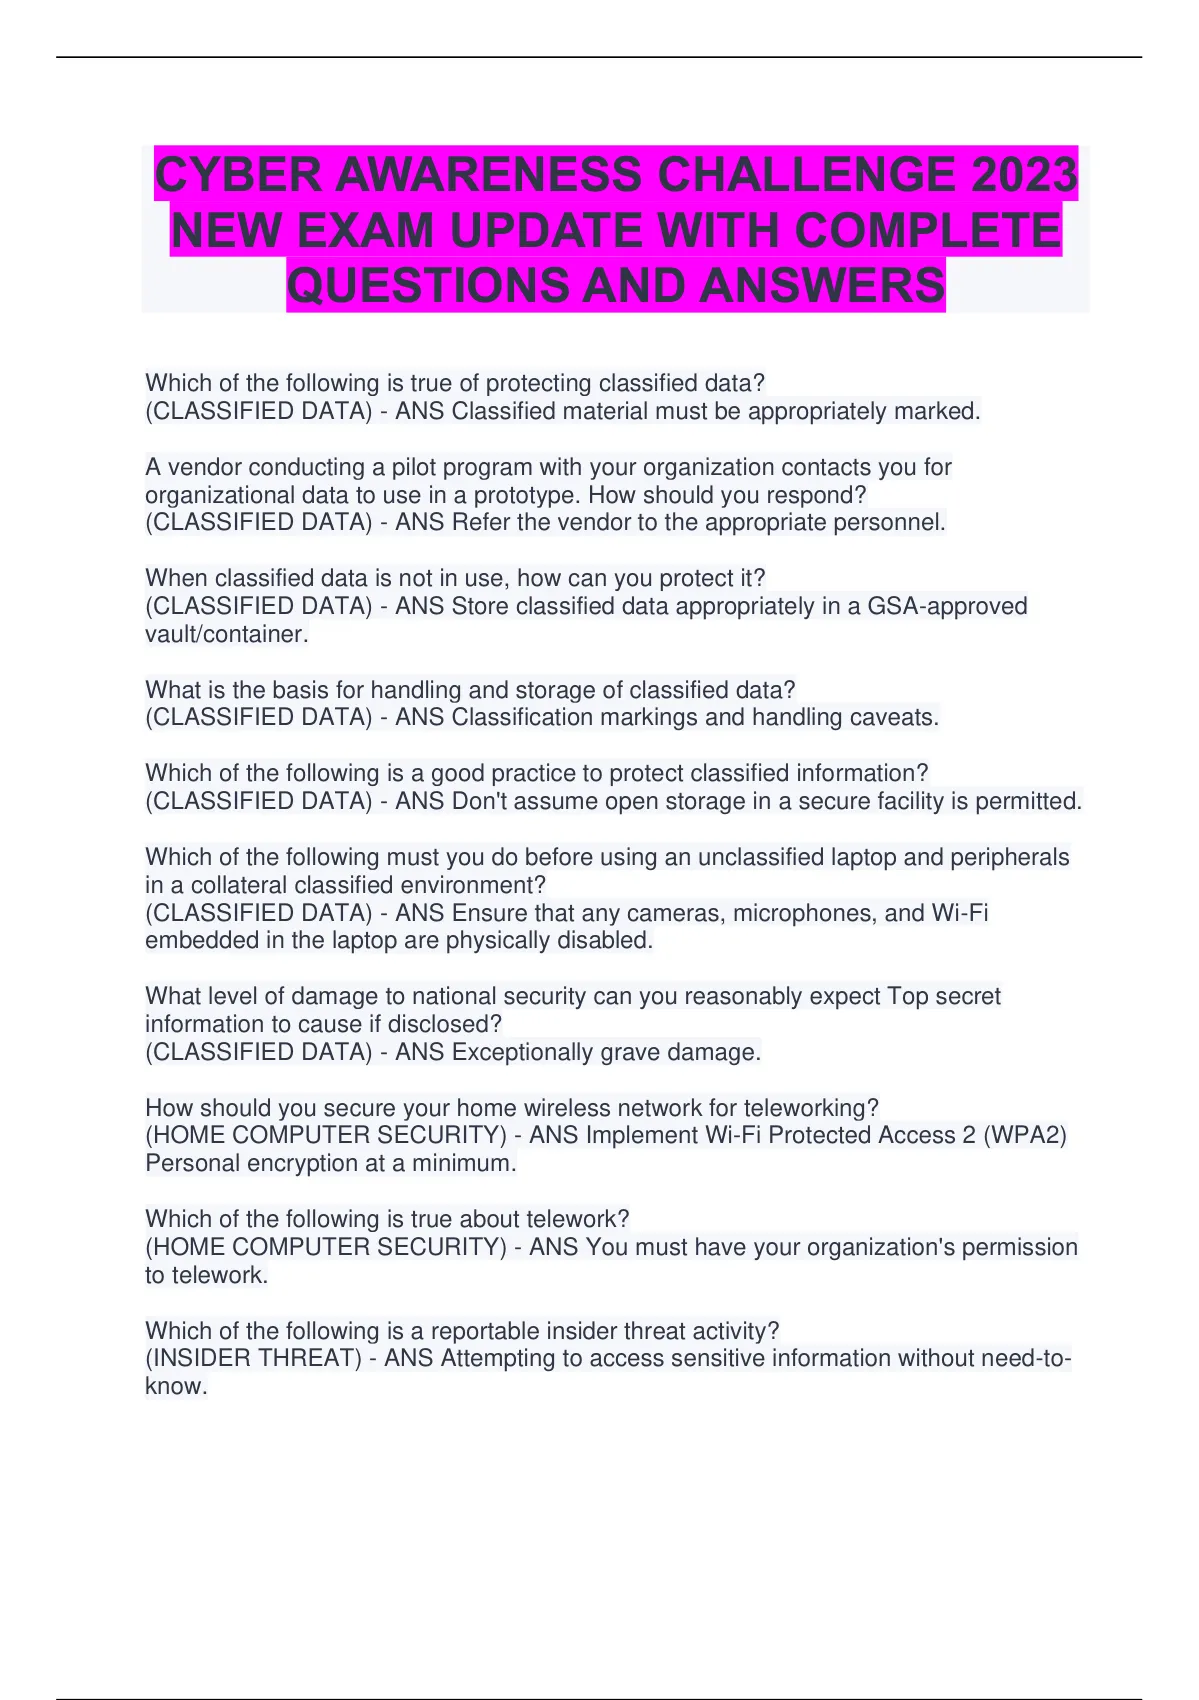 CYBER AWARENESS CHALLENGE 2023 NEW EXAM UPDATE WITH COMPLETE QUESTIONS